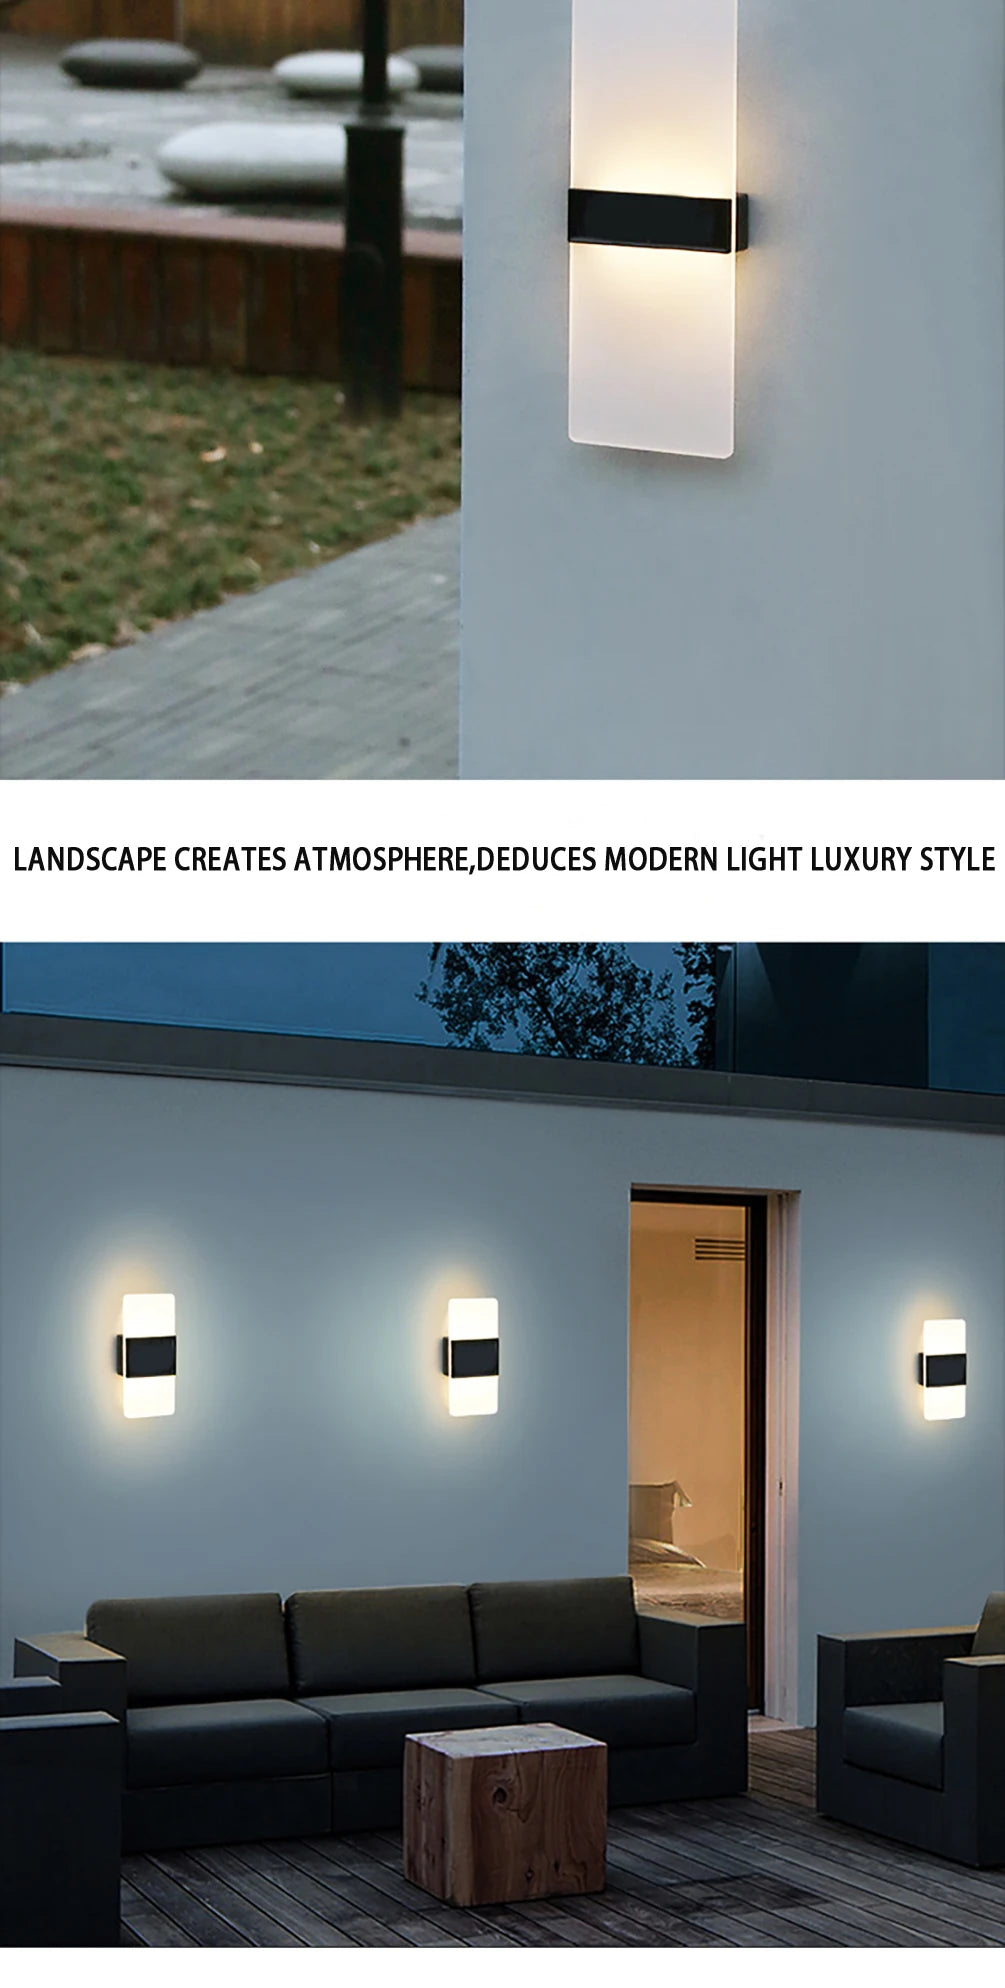 LED Solar Wall Light, Elegant outdoor lighting creates a modern ambiance, perfect for luxury landscapes.